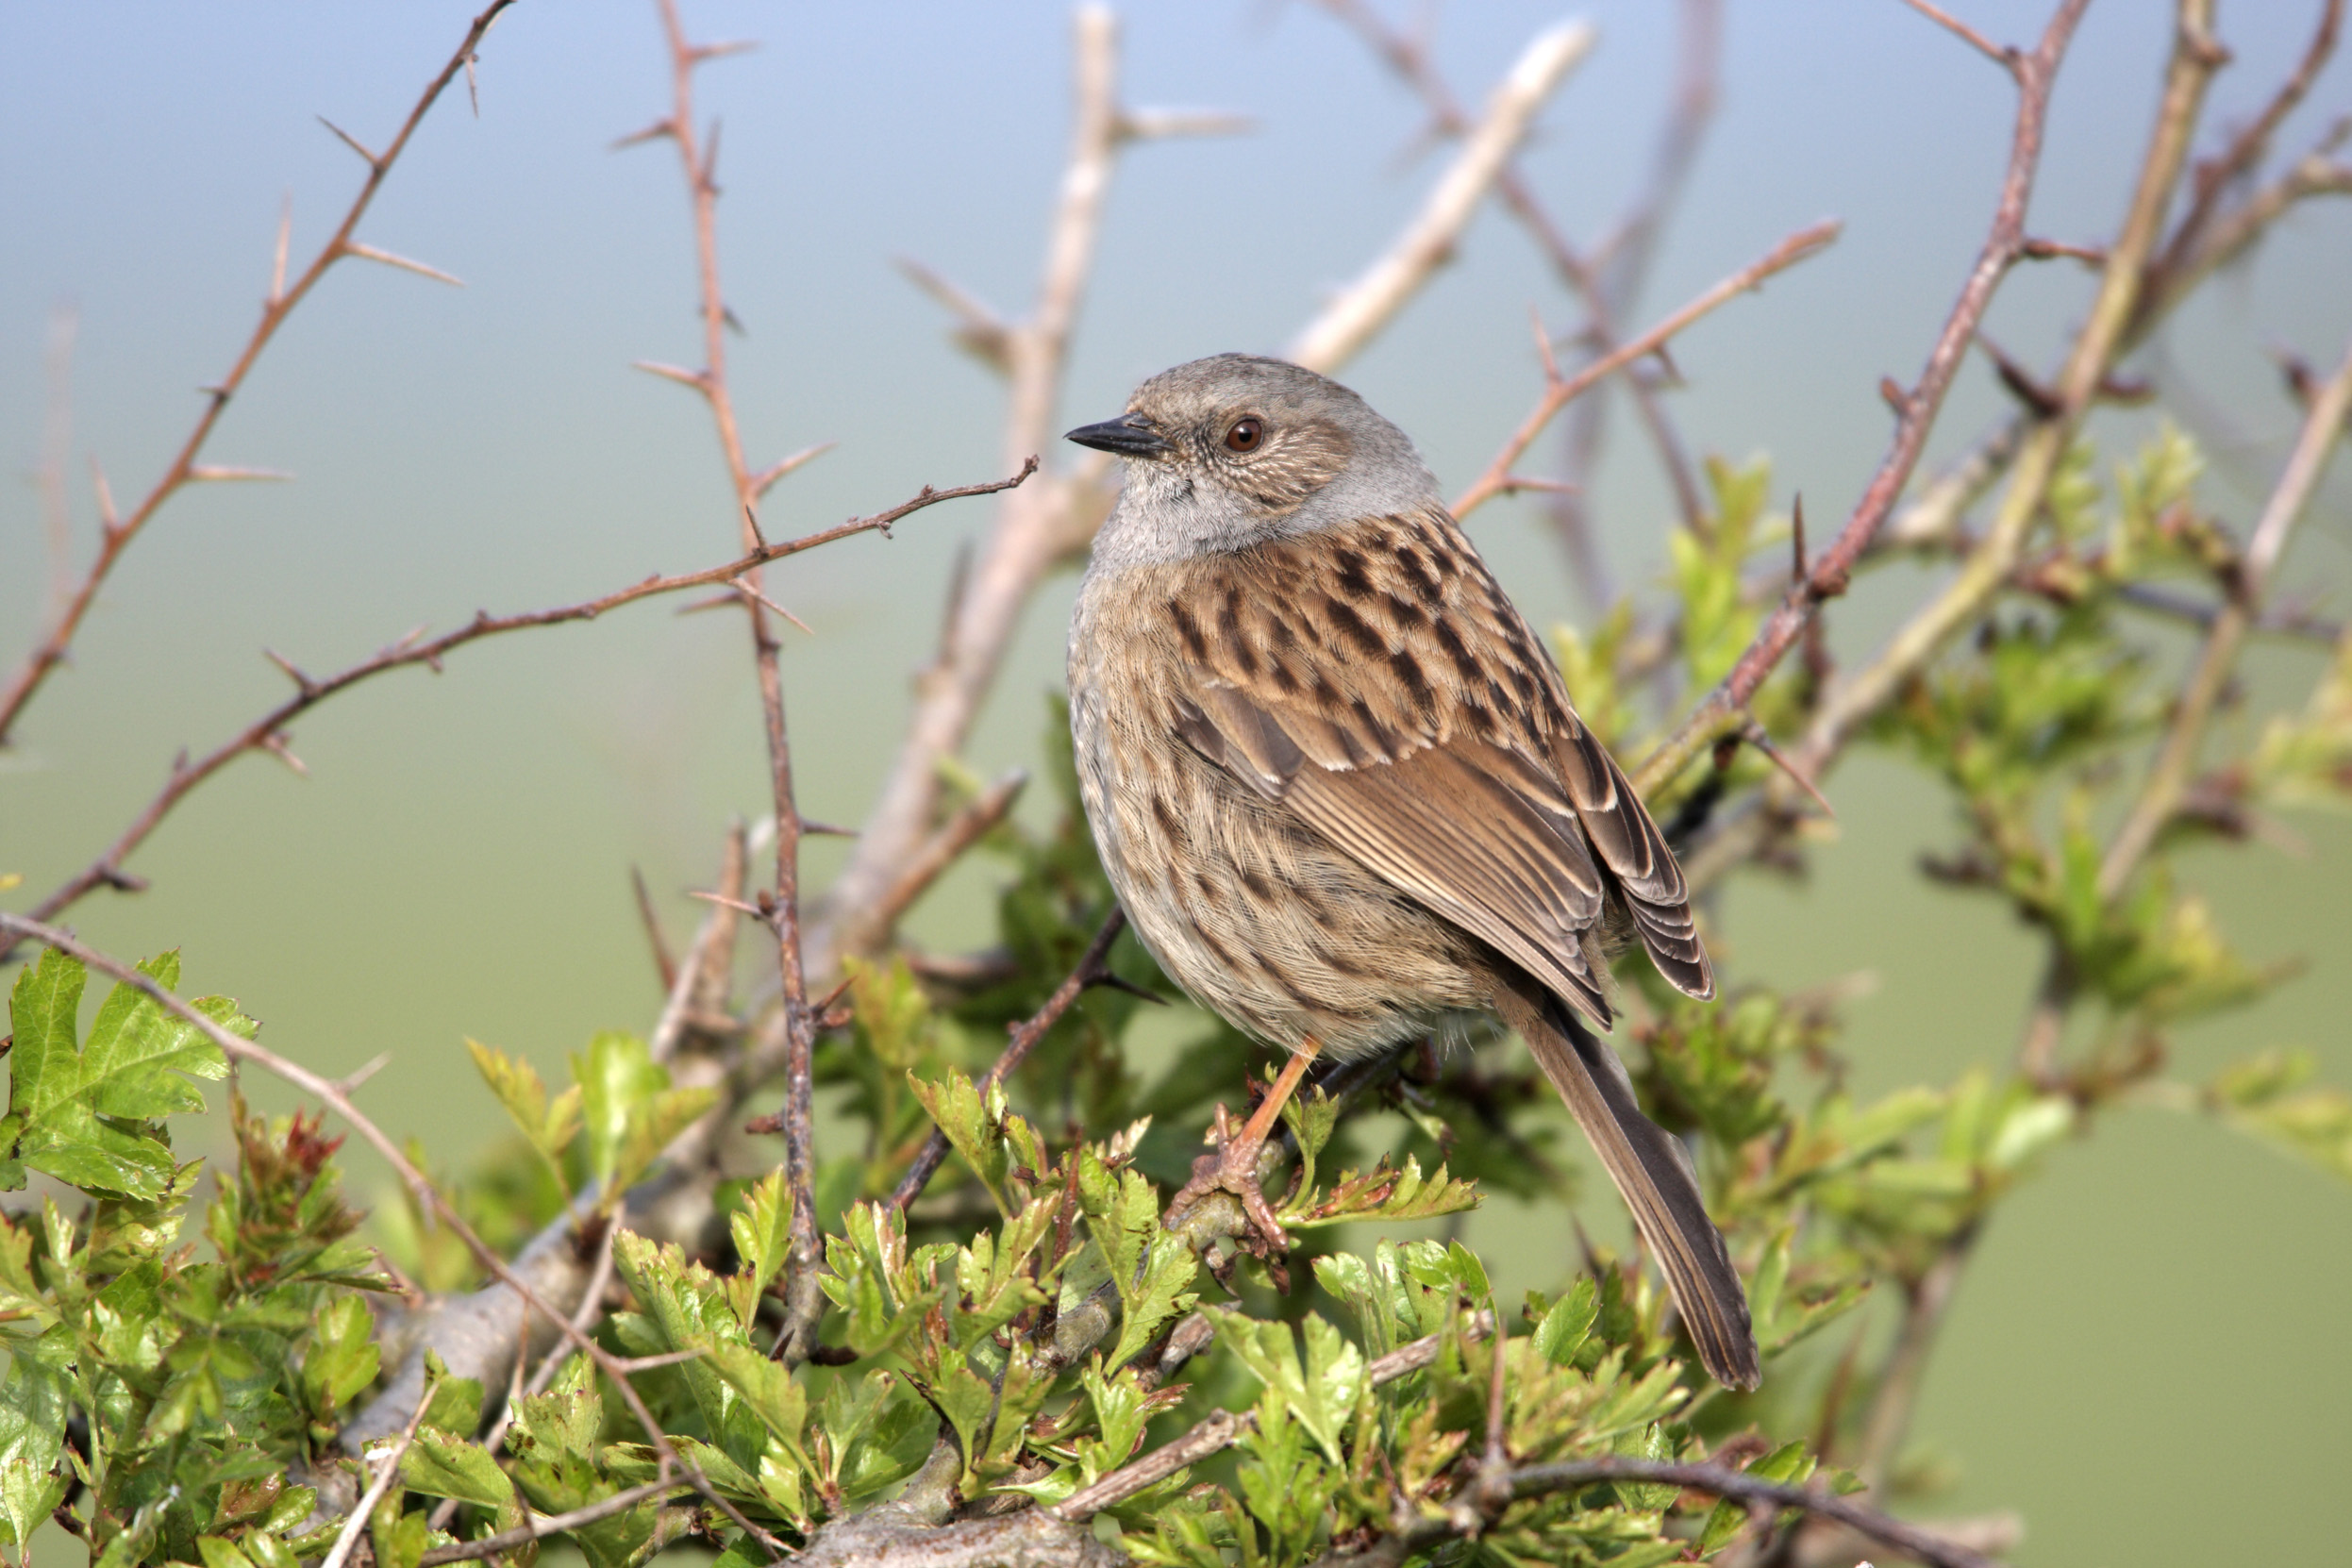 A lone Dunnock perched on a twig.